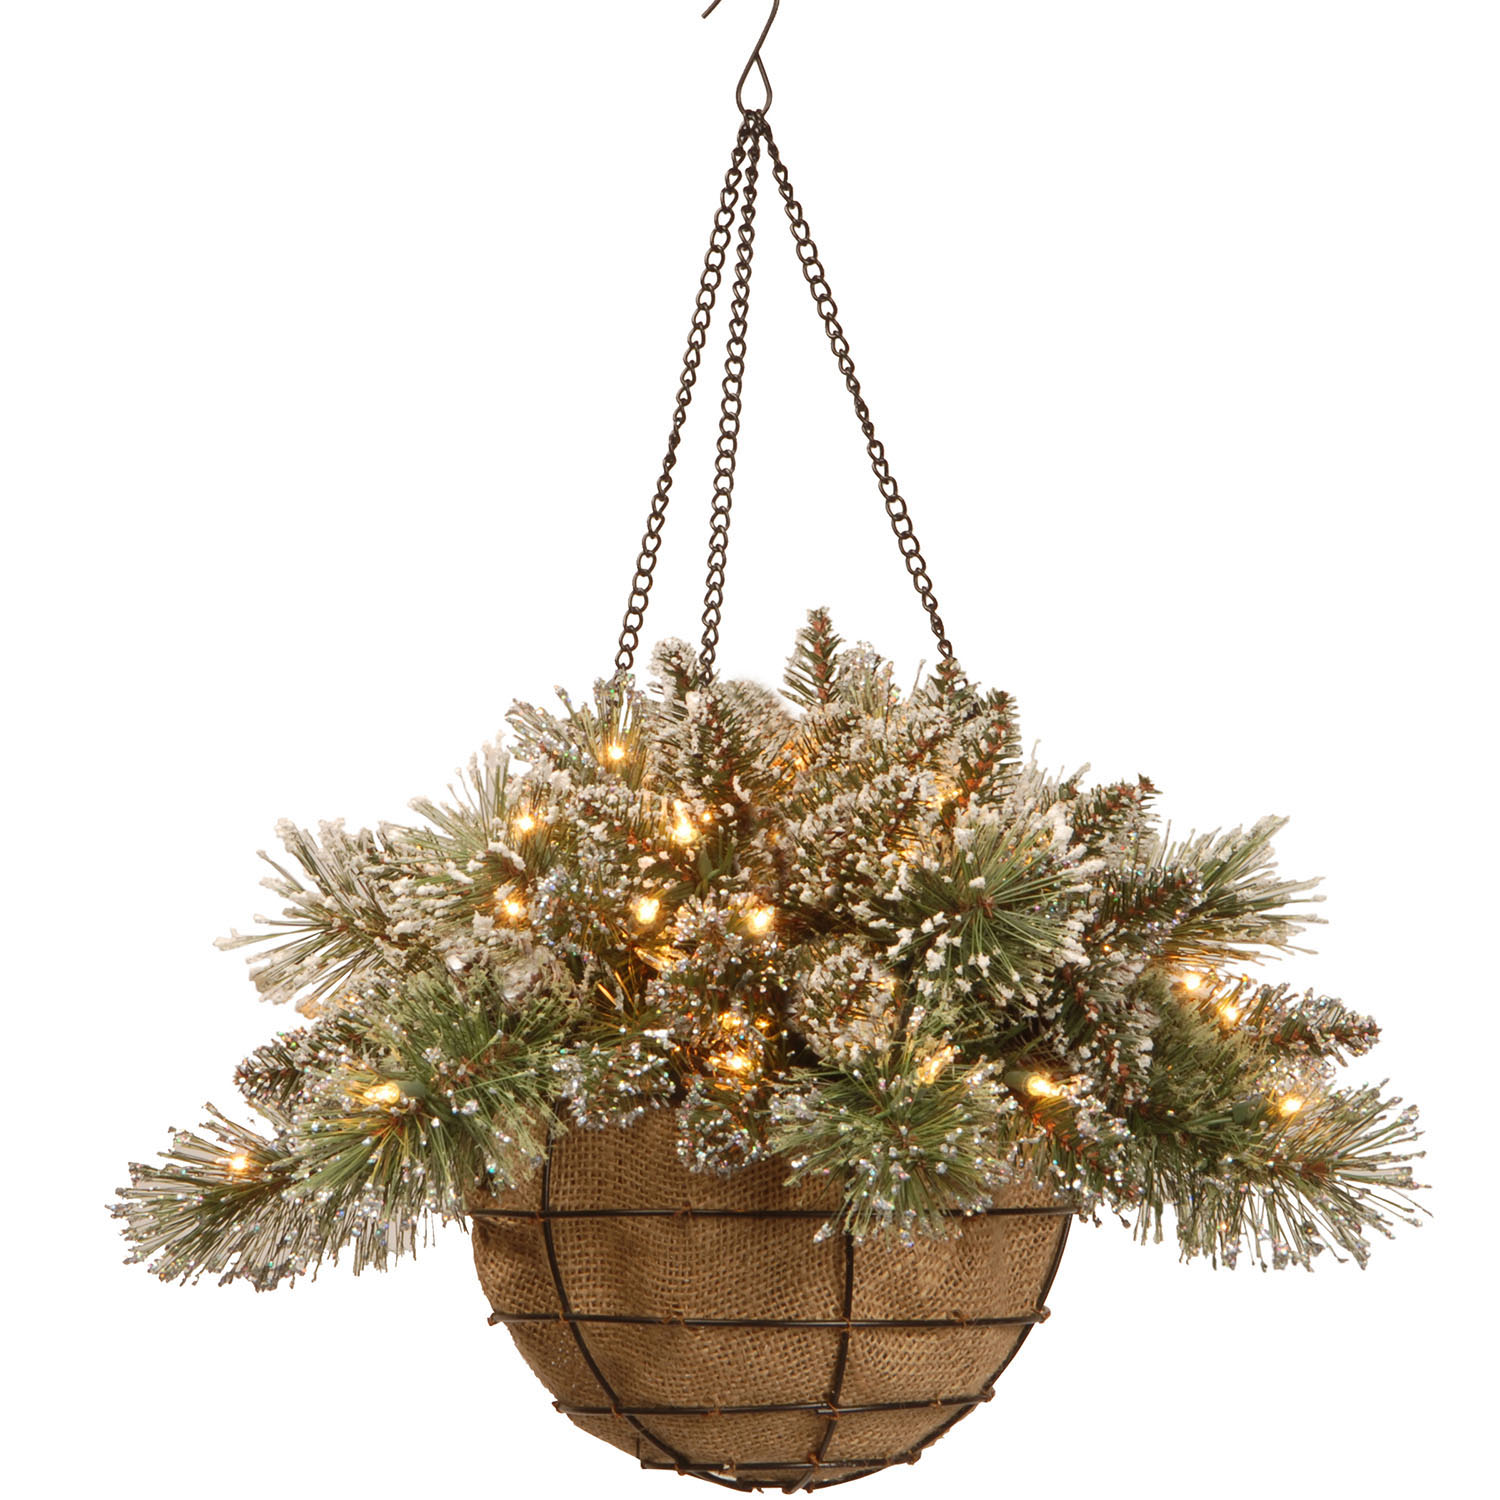 20 Inch Glittery Bristle Pine Hanging Basket: Battery/timer Operated Leds